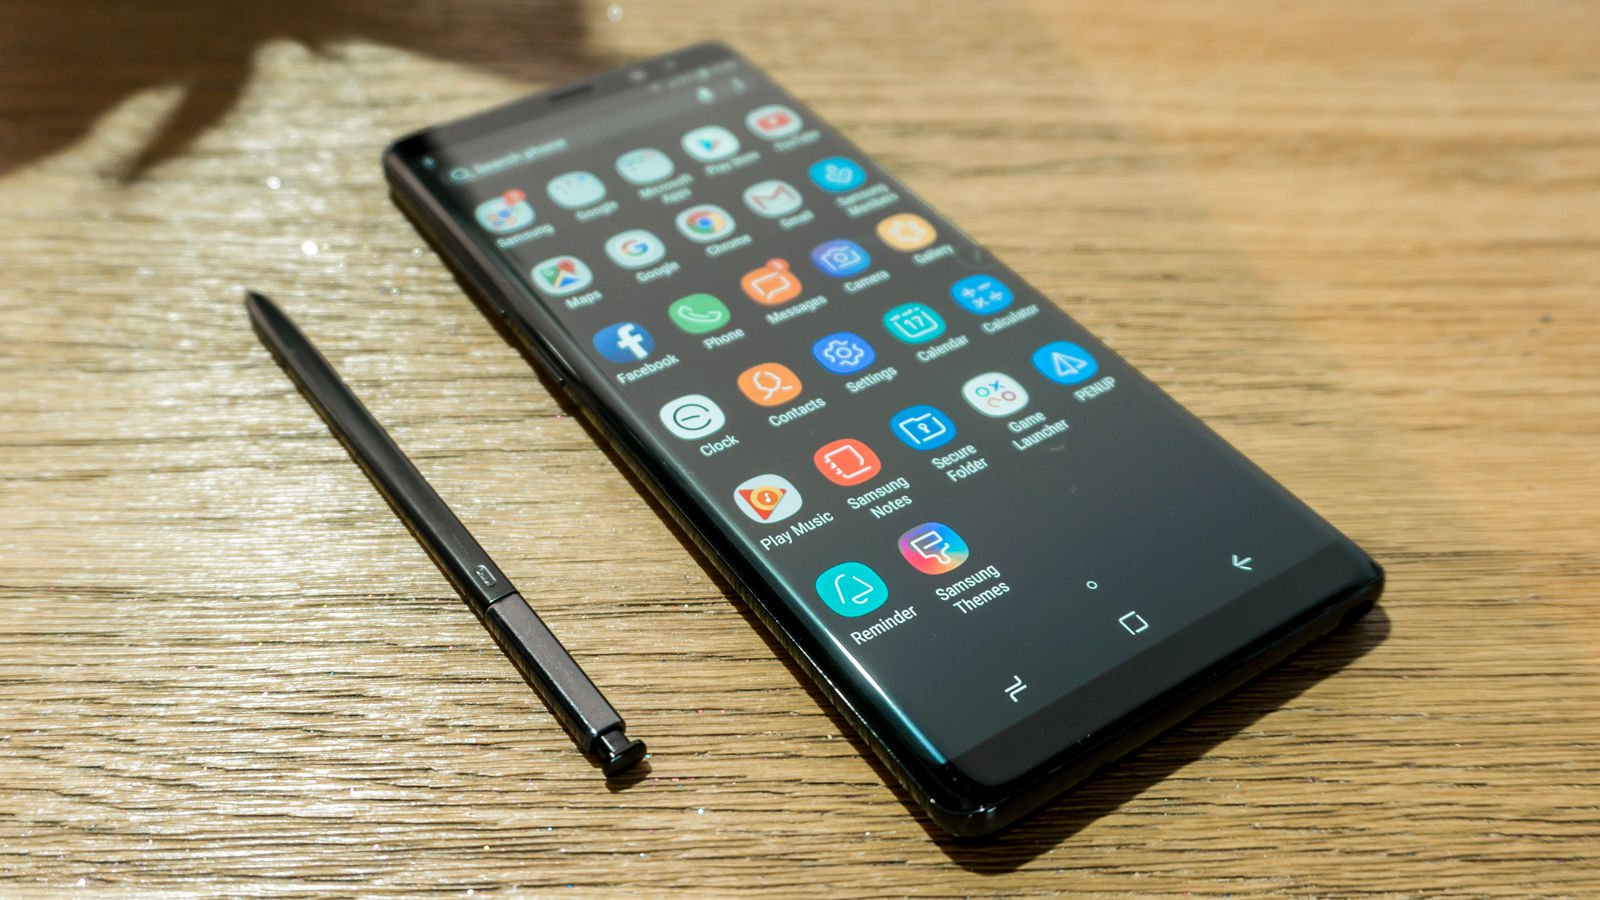 Galaxy Note 8 Smashes all pre-sale expectations